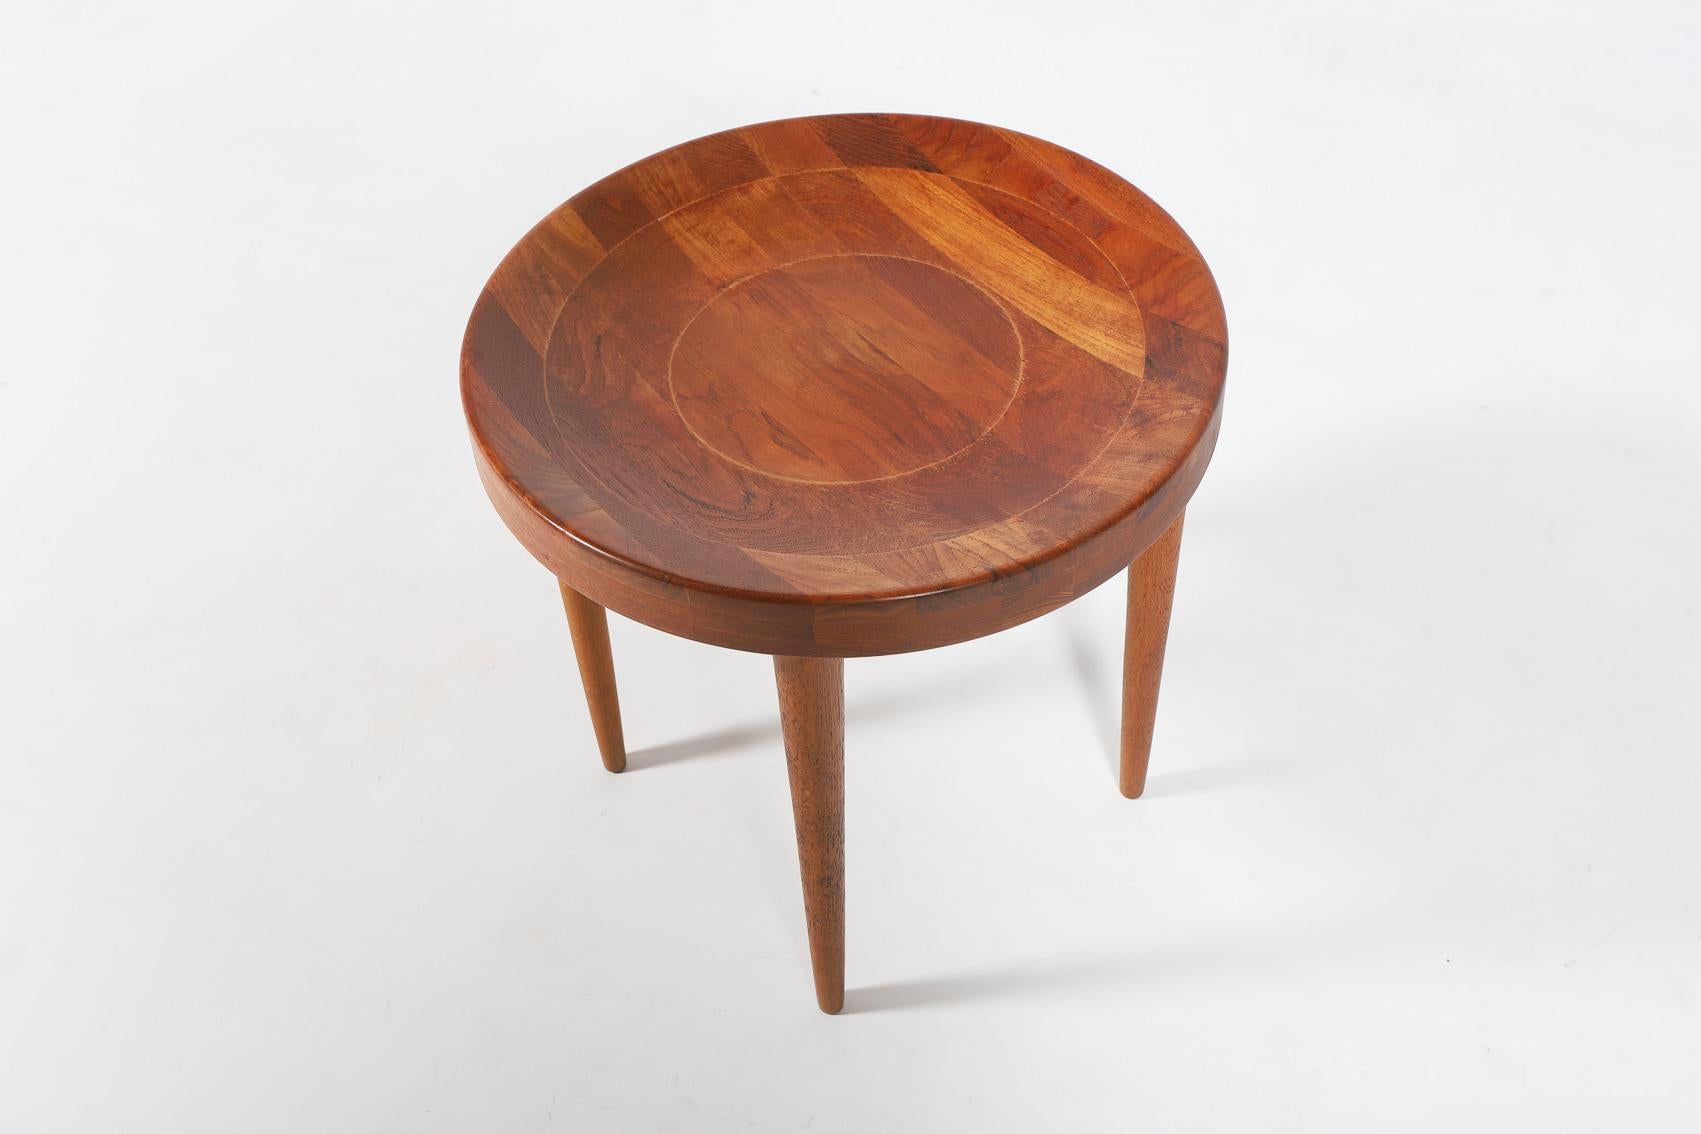 Mid-Century Modern Danish Modern side table from Jens Harald Quistgaard, 1950’s